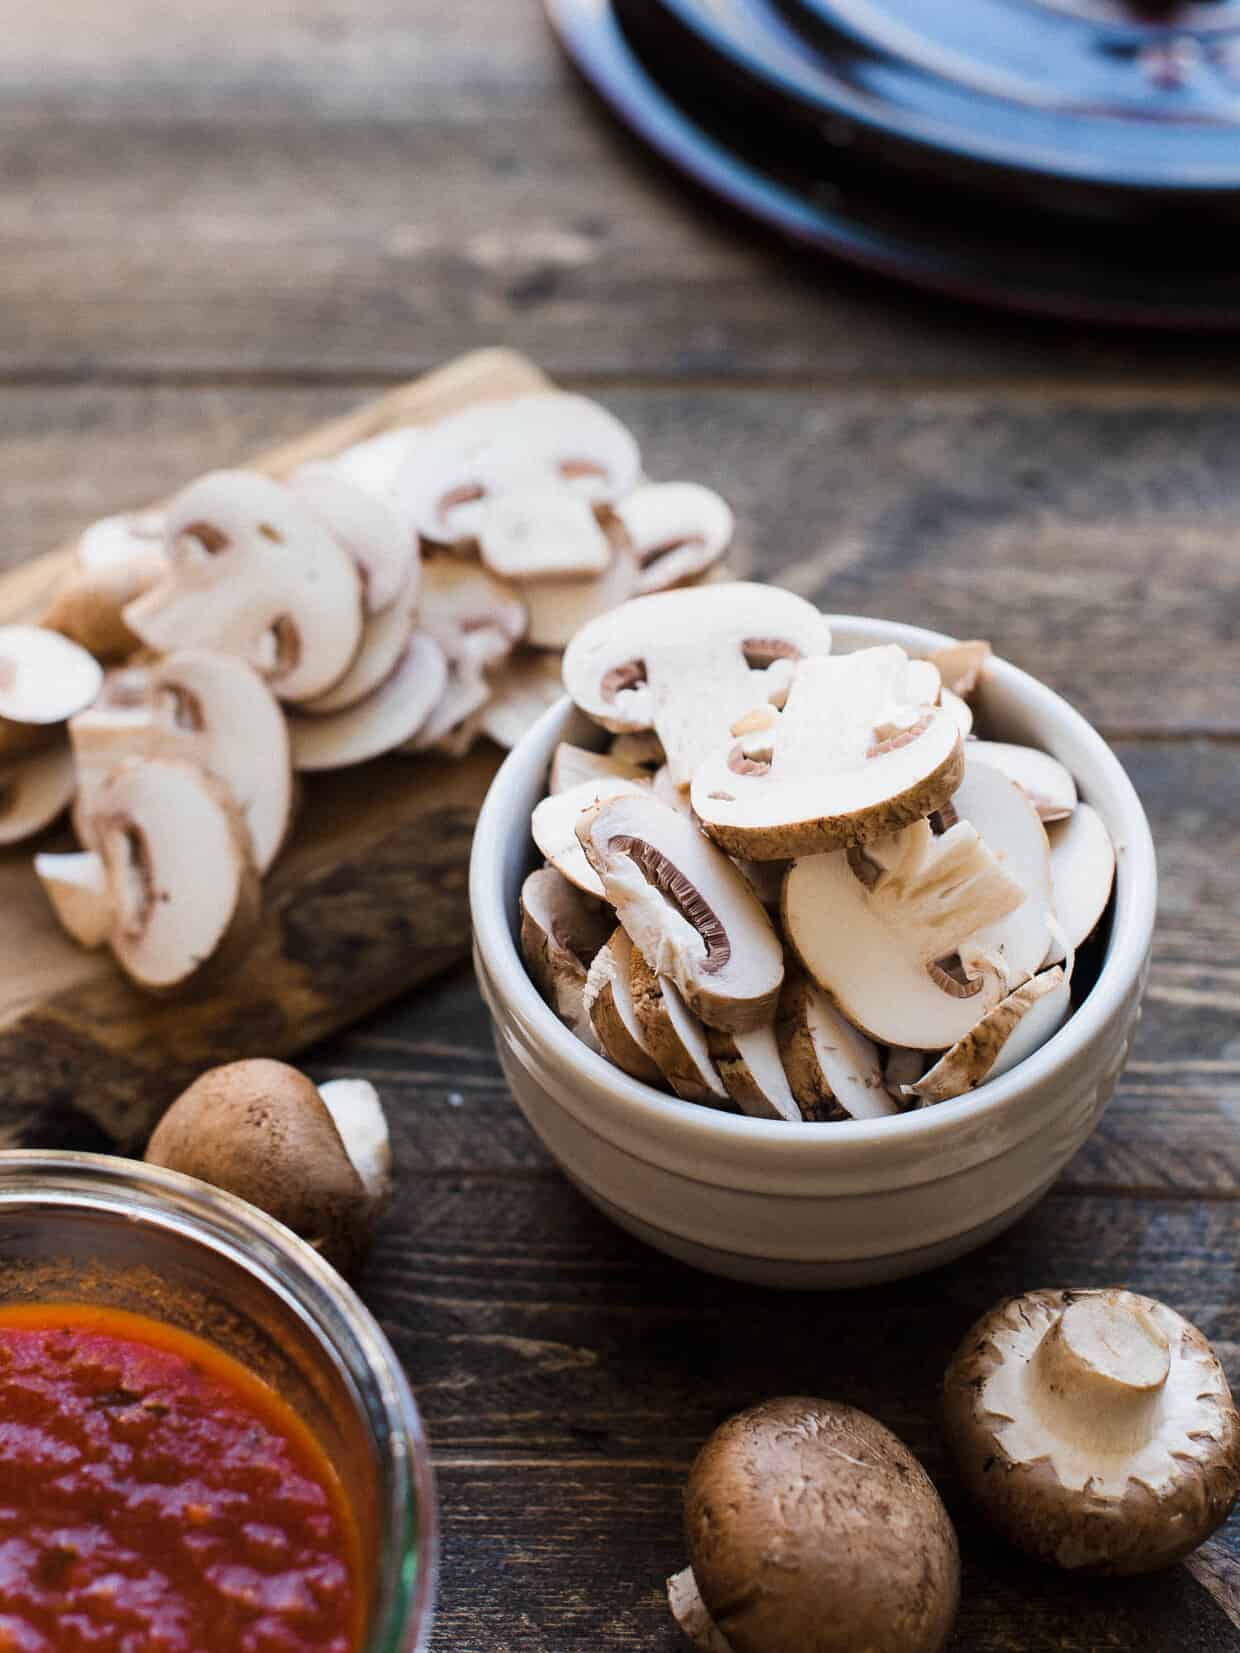 Sliced mushrooms in a white bowl on a wooden surface.